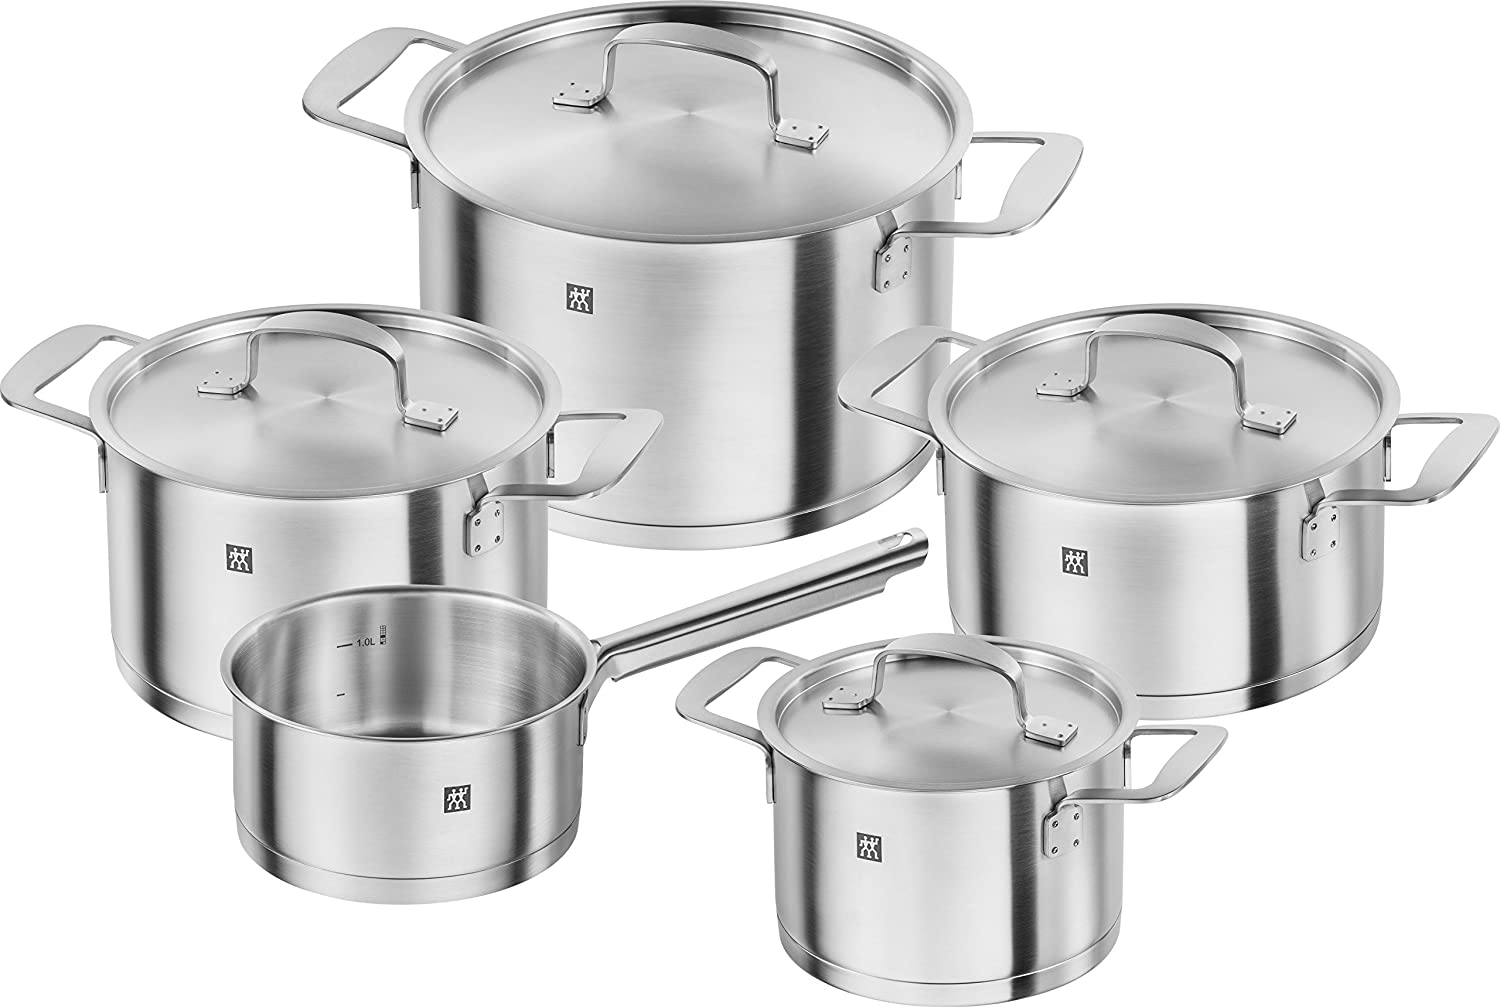 Zwilling Cookware Set, 5 Pieces, Stainless Steel, Silver, 560 cm, 5 Units